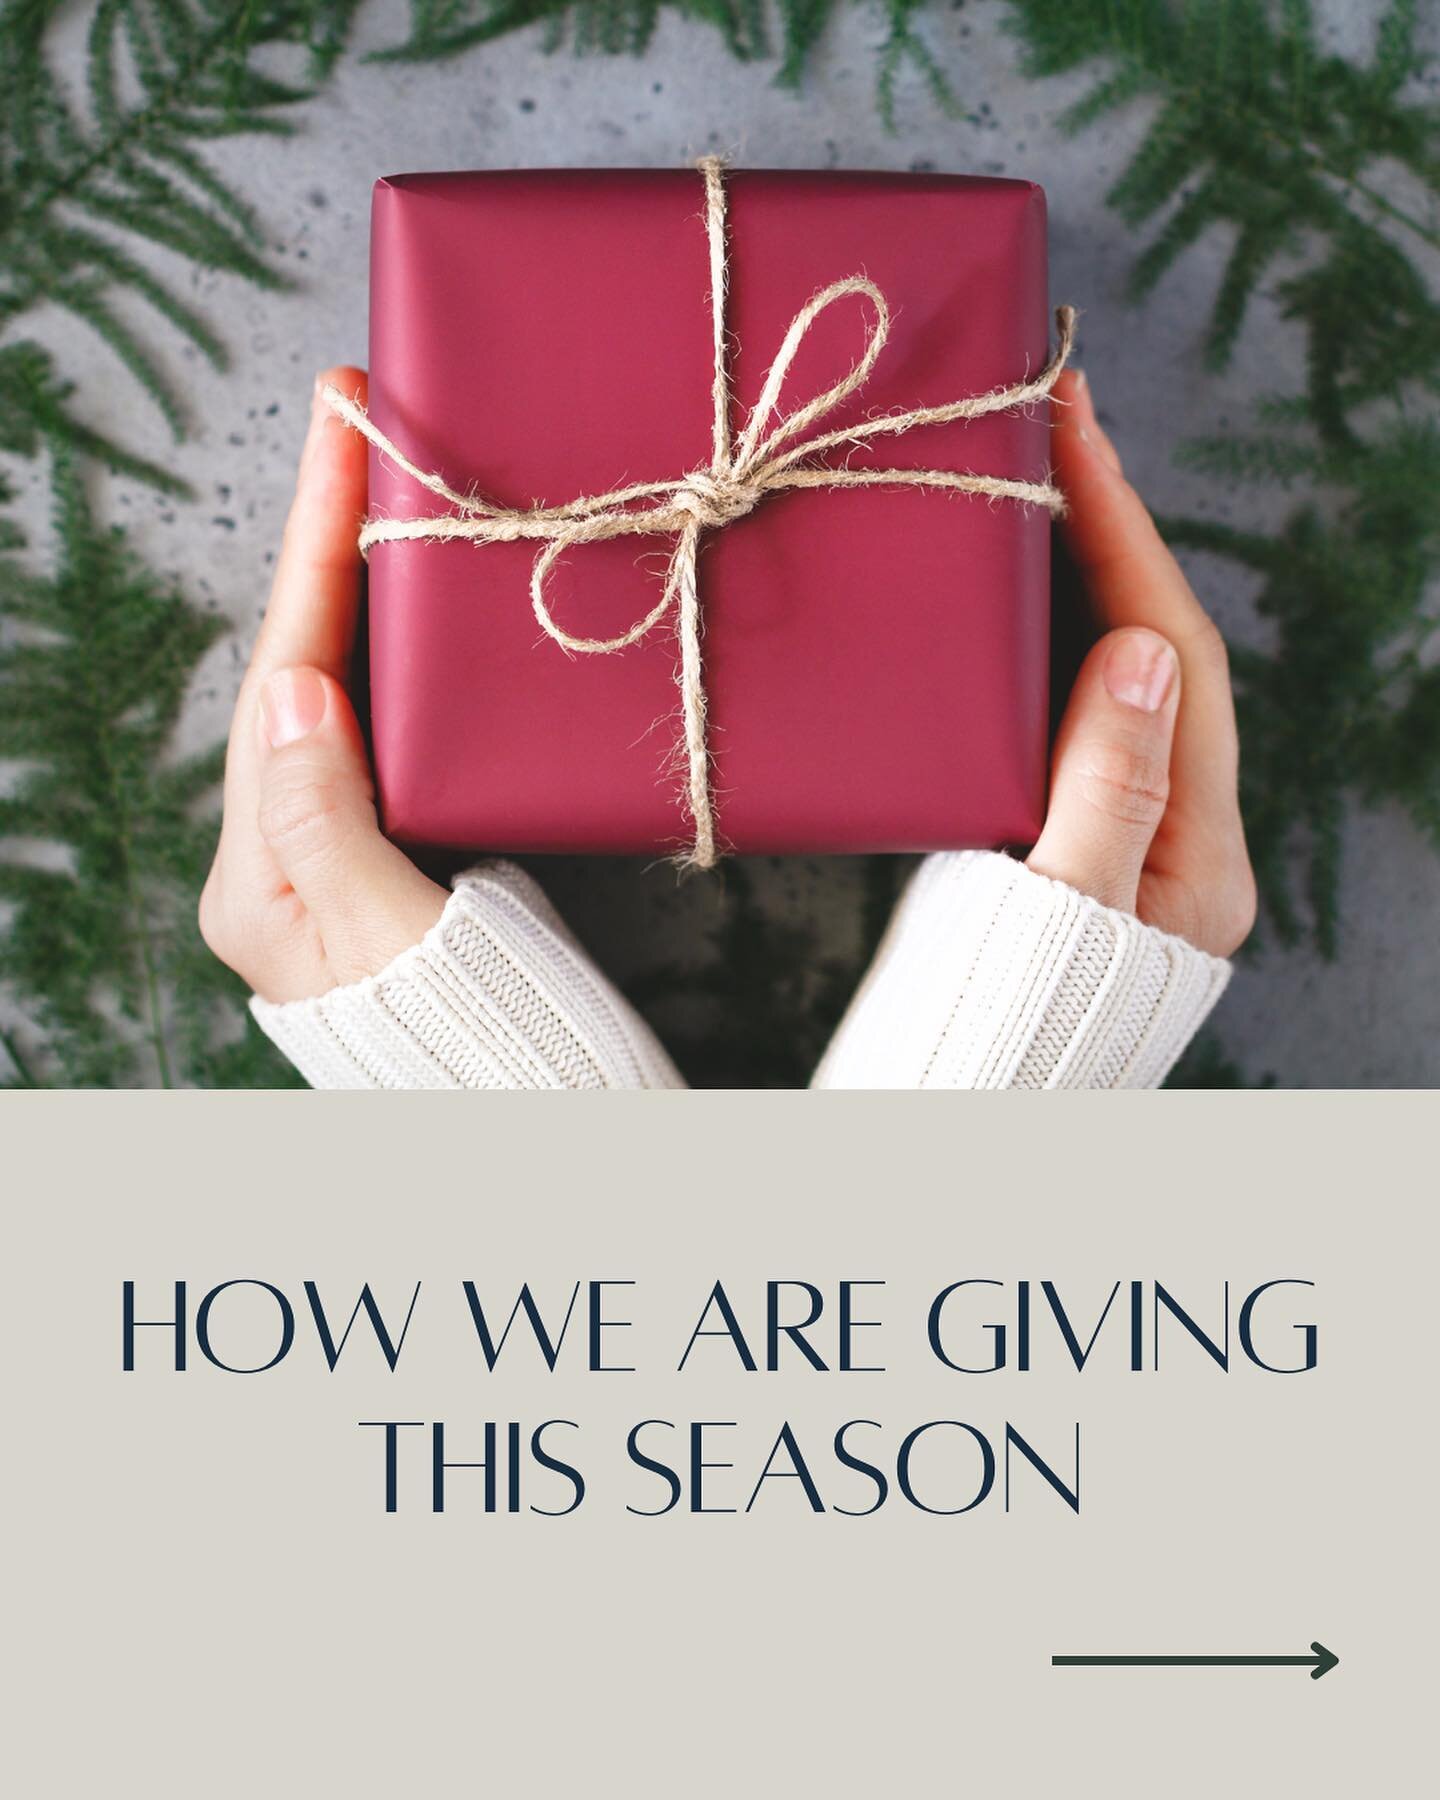 Tis the season of giving y&rsquo;all! As we get closer to Christmas and we all shop to give to the ones we love, at Willow &amp; Knox we are choosing to show love in the midst of the chaos.
 ⠀⠀⠀⠀⠀⠀⠀⠀⠀⠀⠀⠀ 
In our last post we talked about how we were 